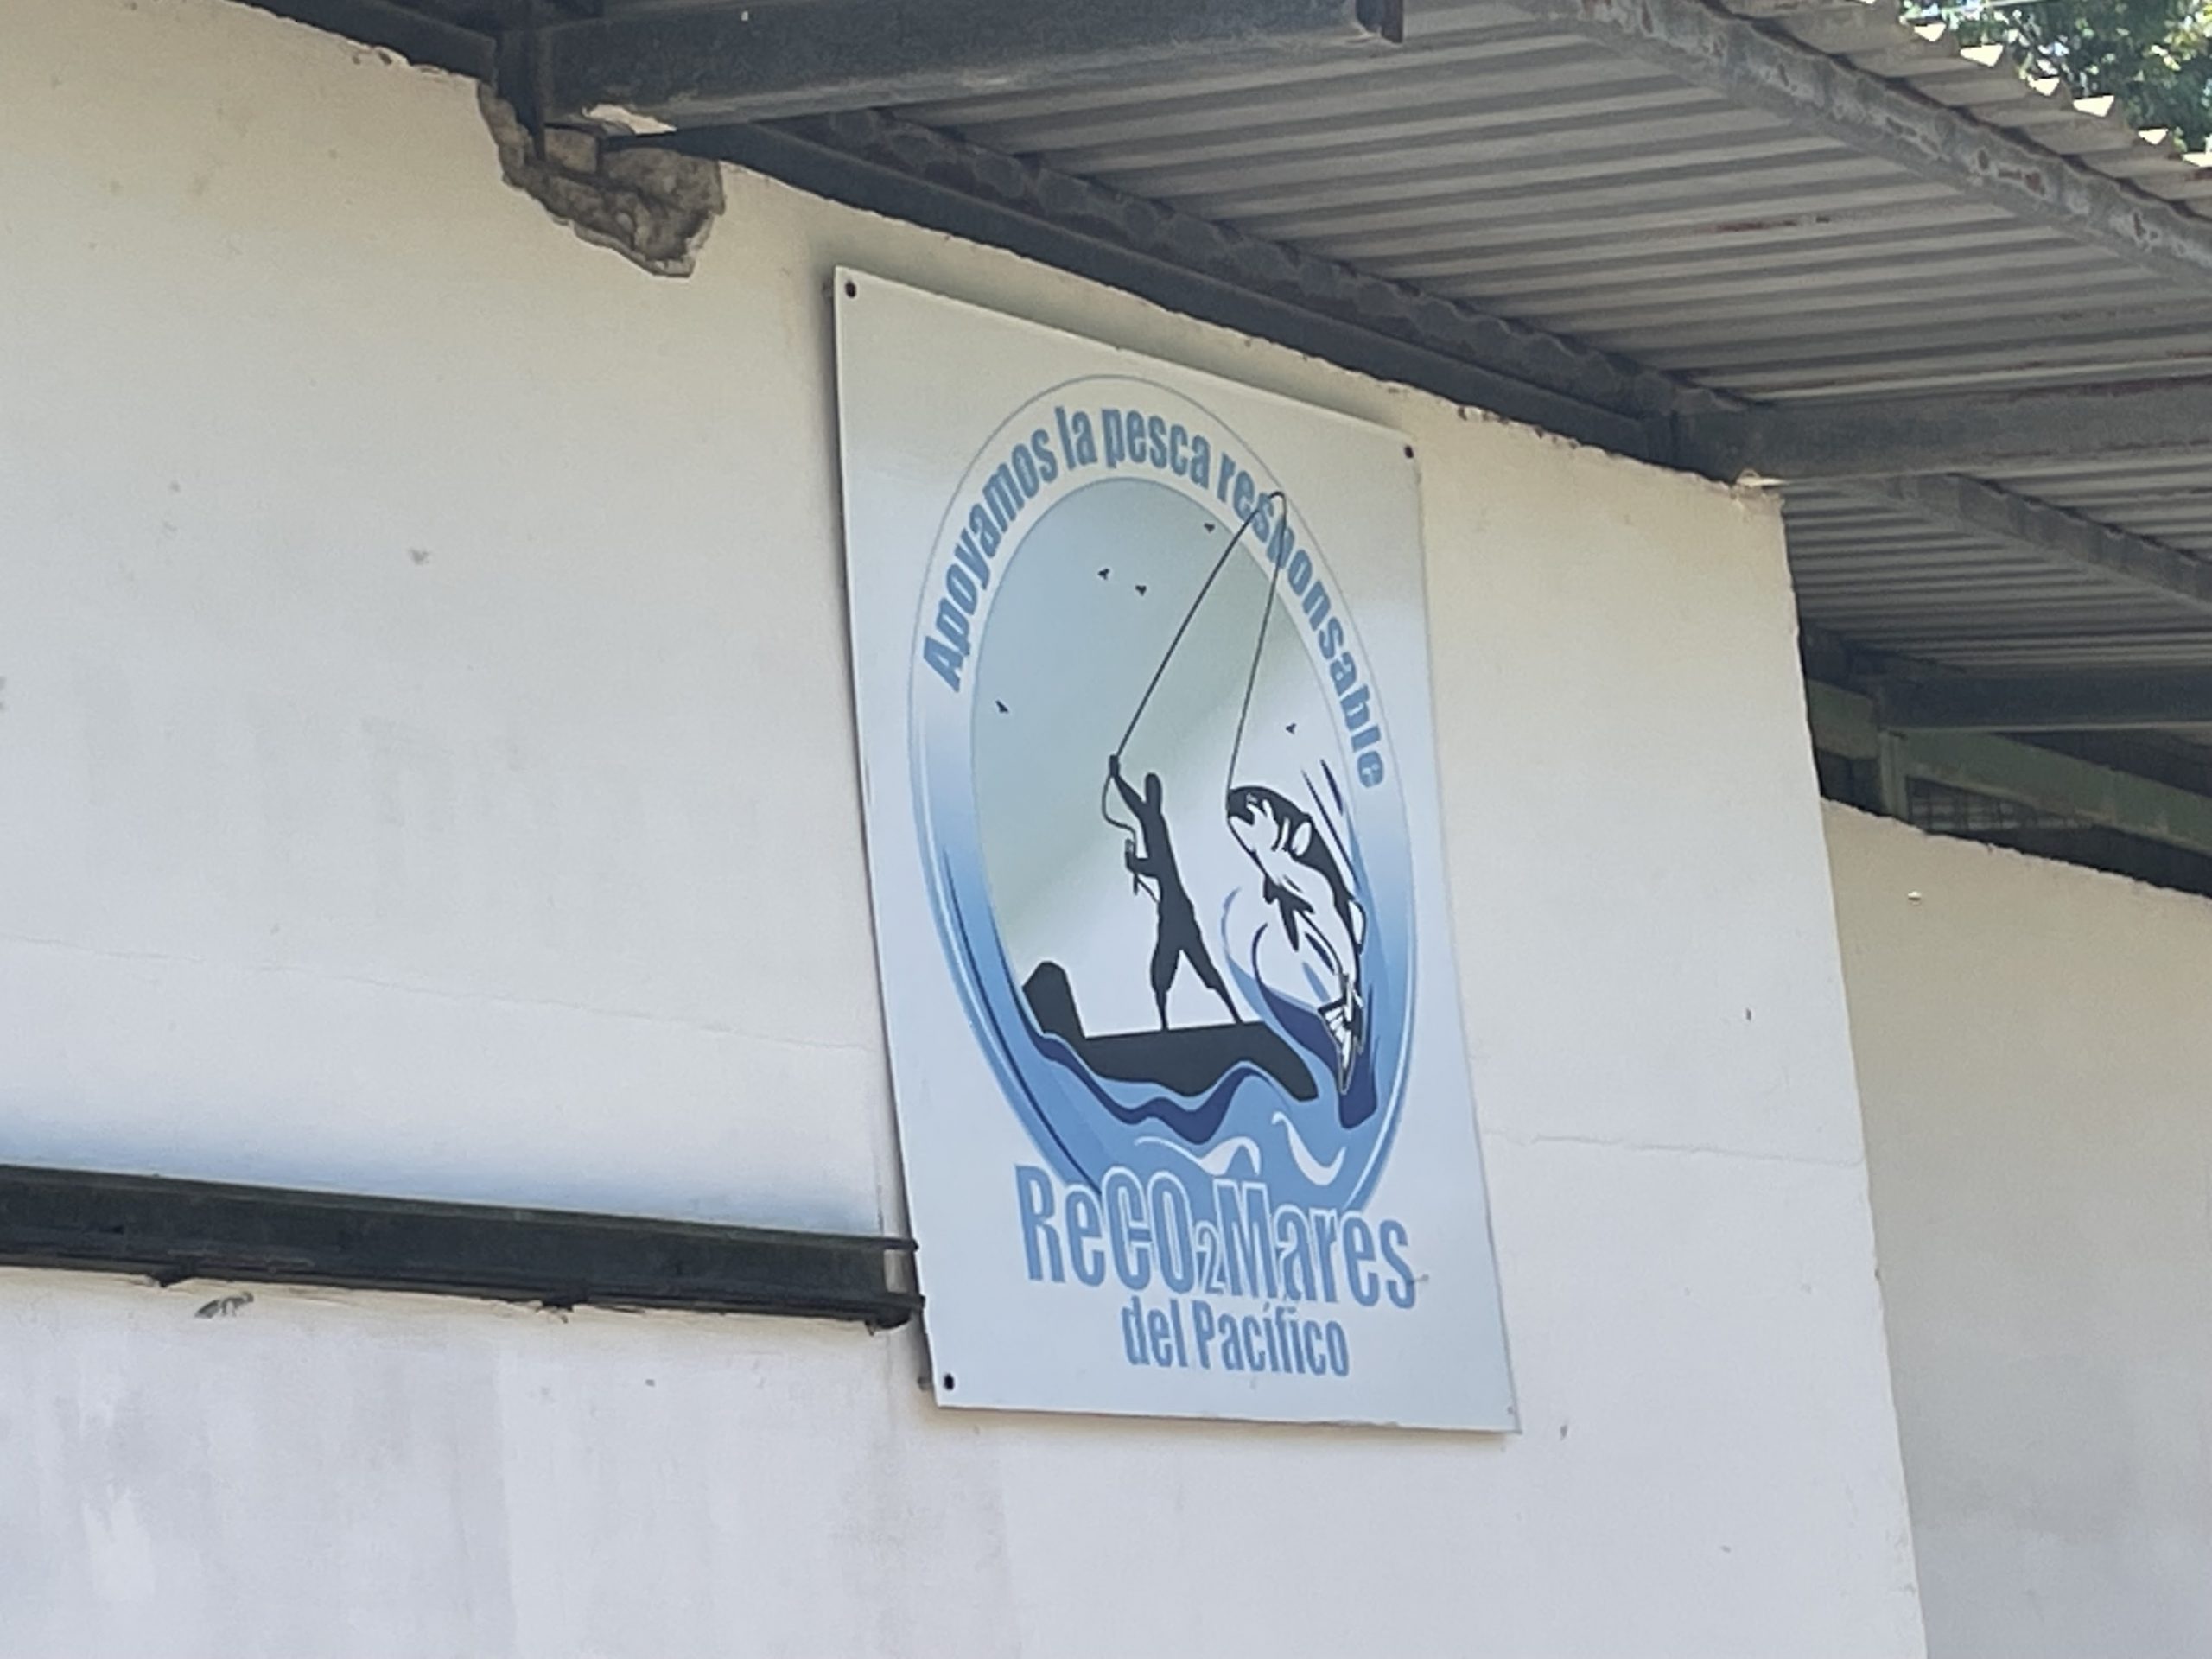 A sign showing a man fishing